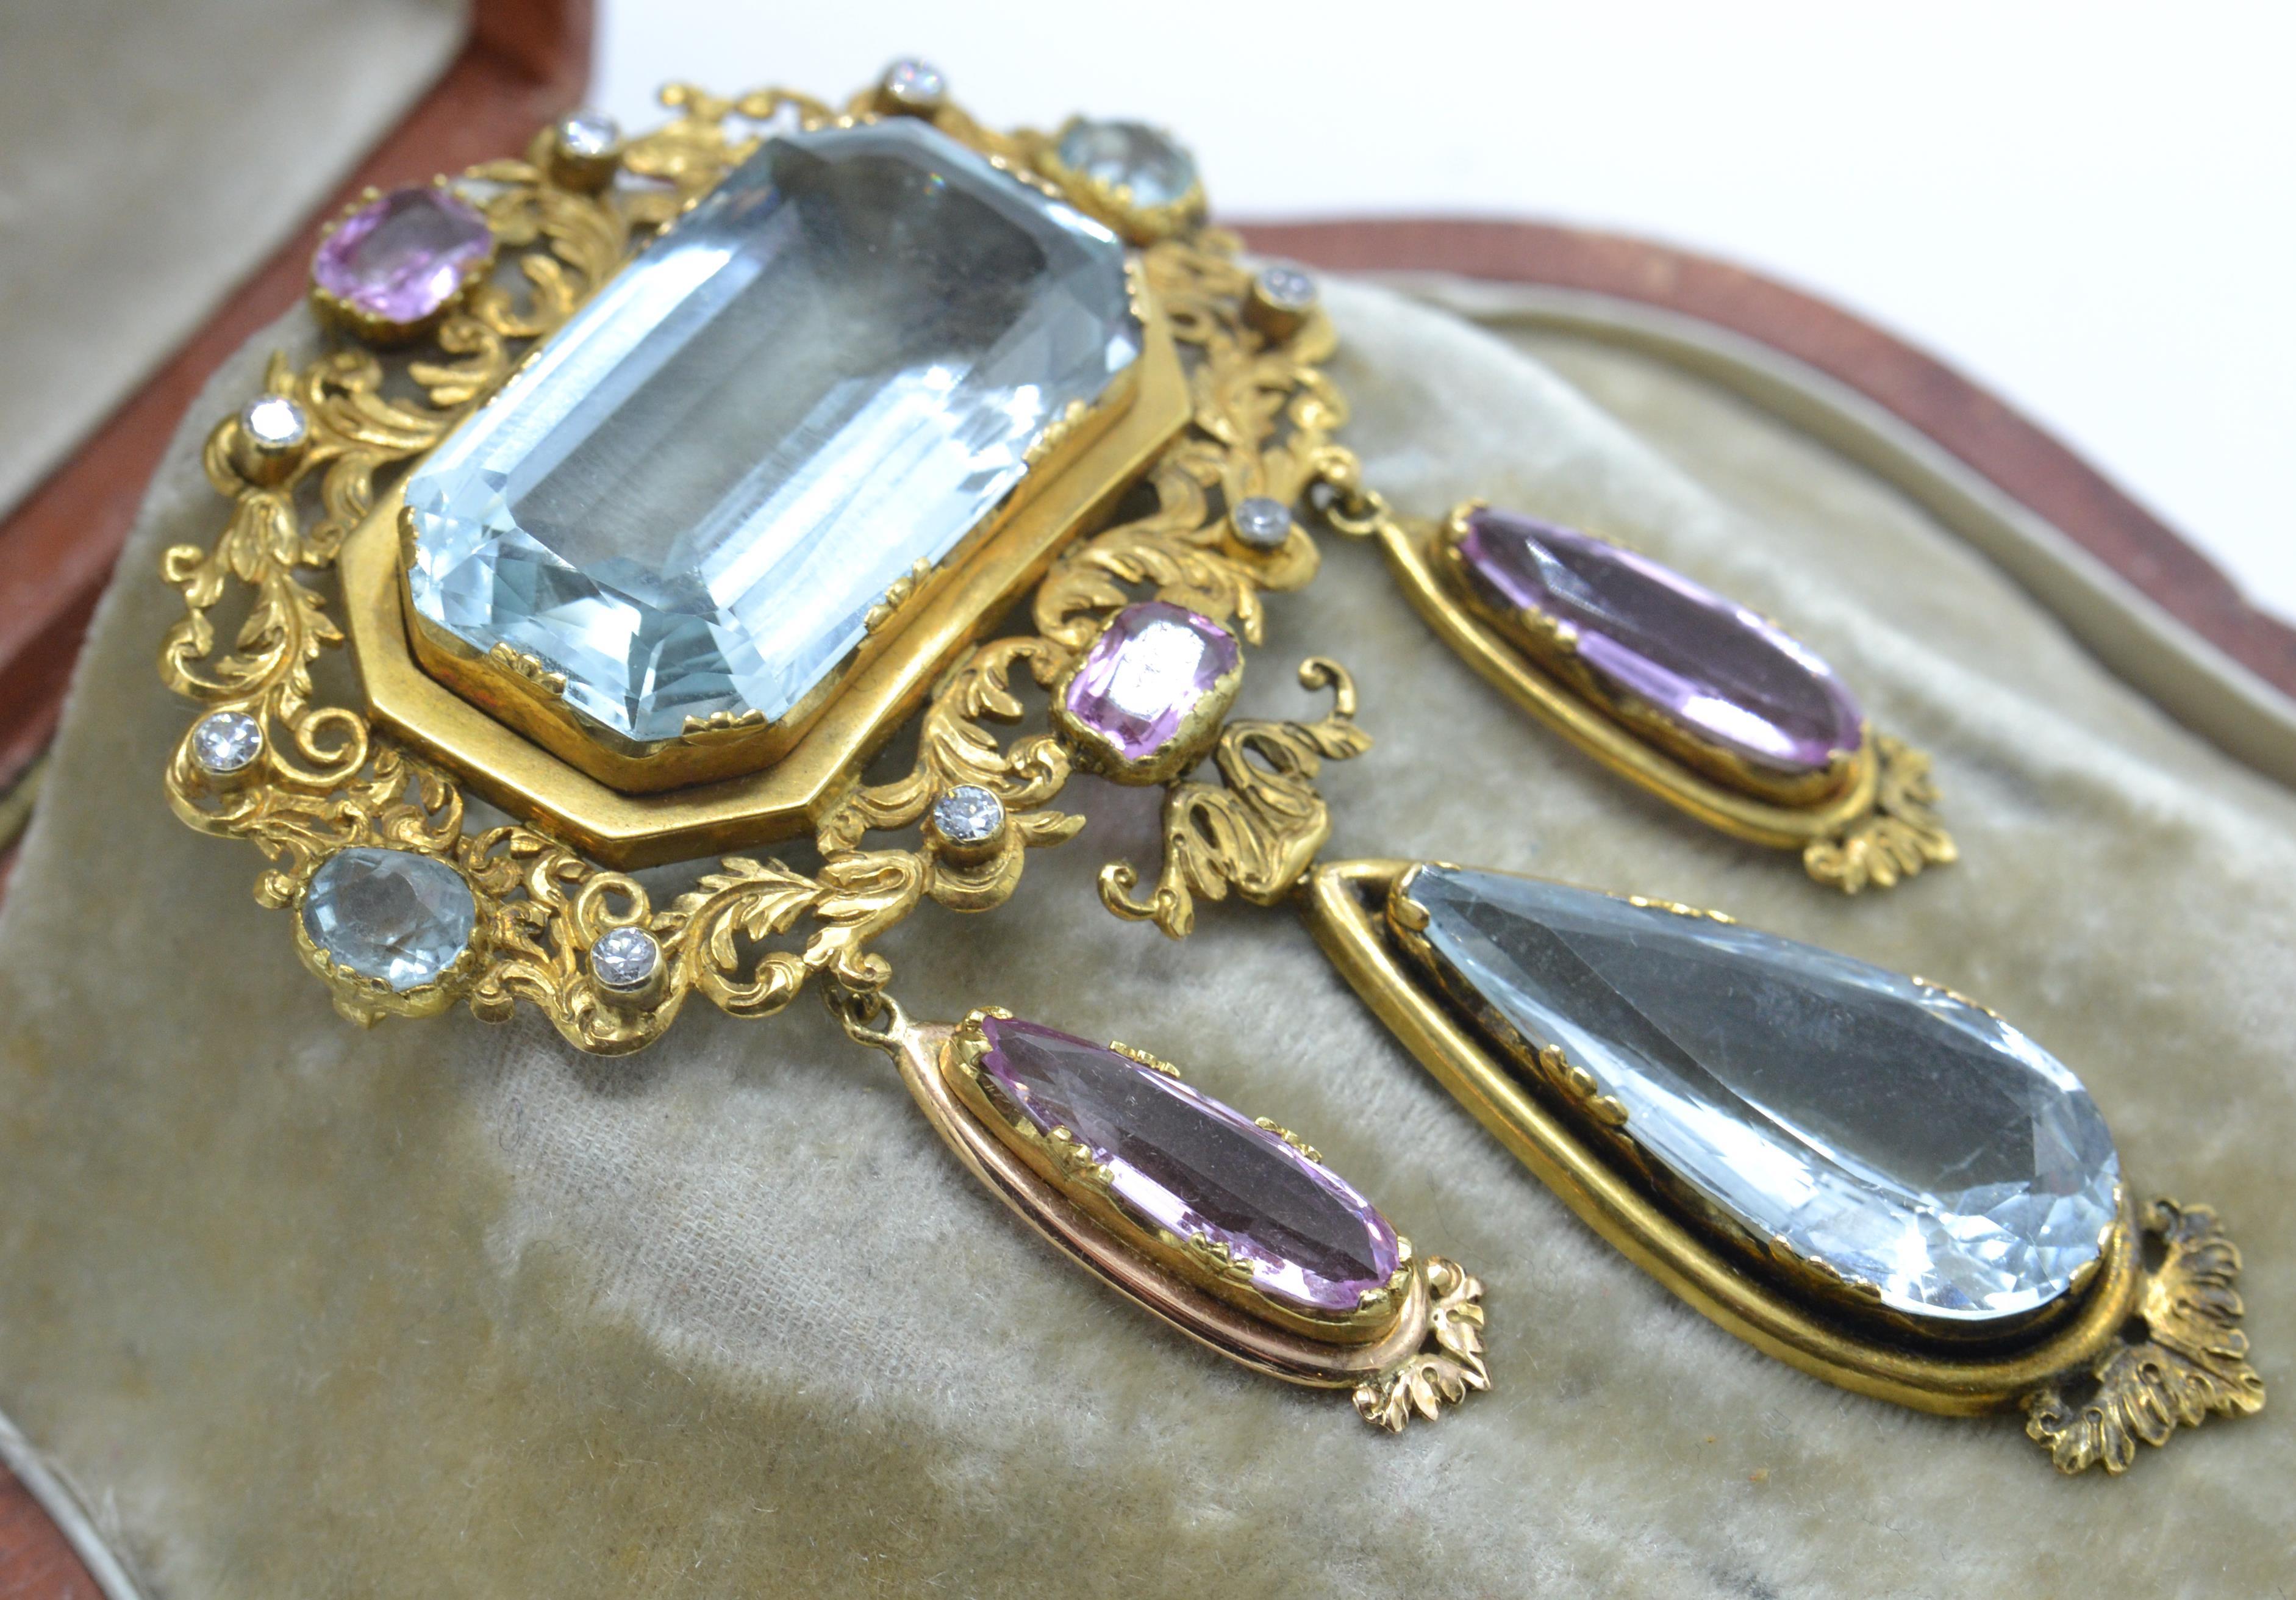 A cased 19th century gold, aquamarine, pink topaz and diamond brooch and earring suite. - Image 7 of 9